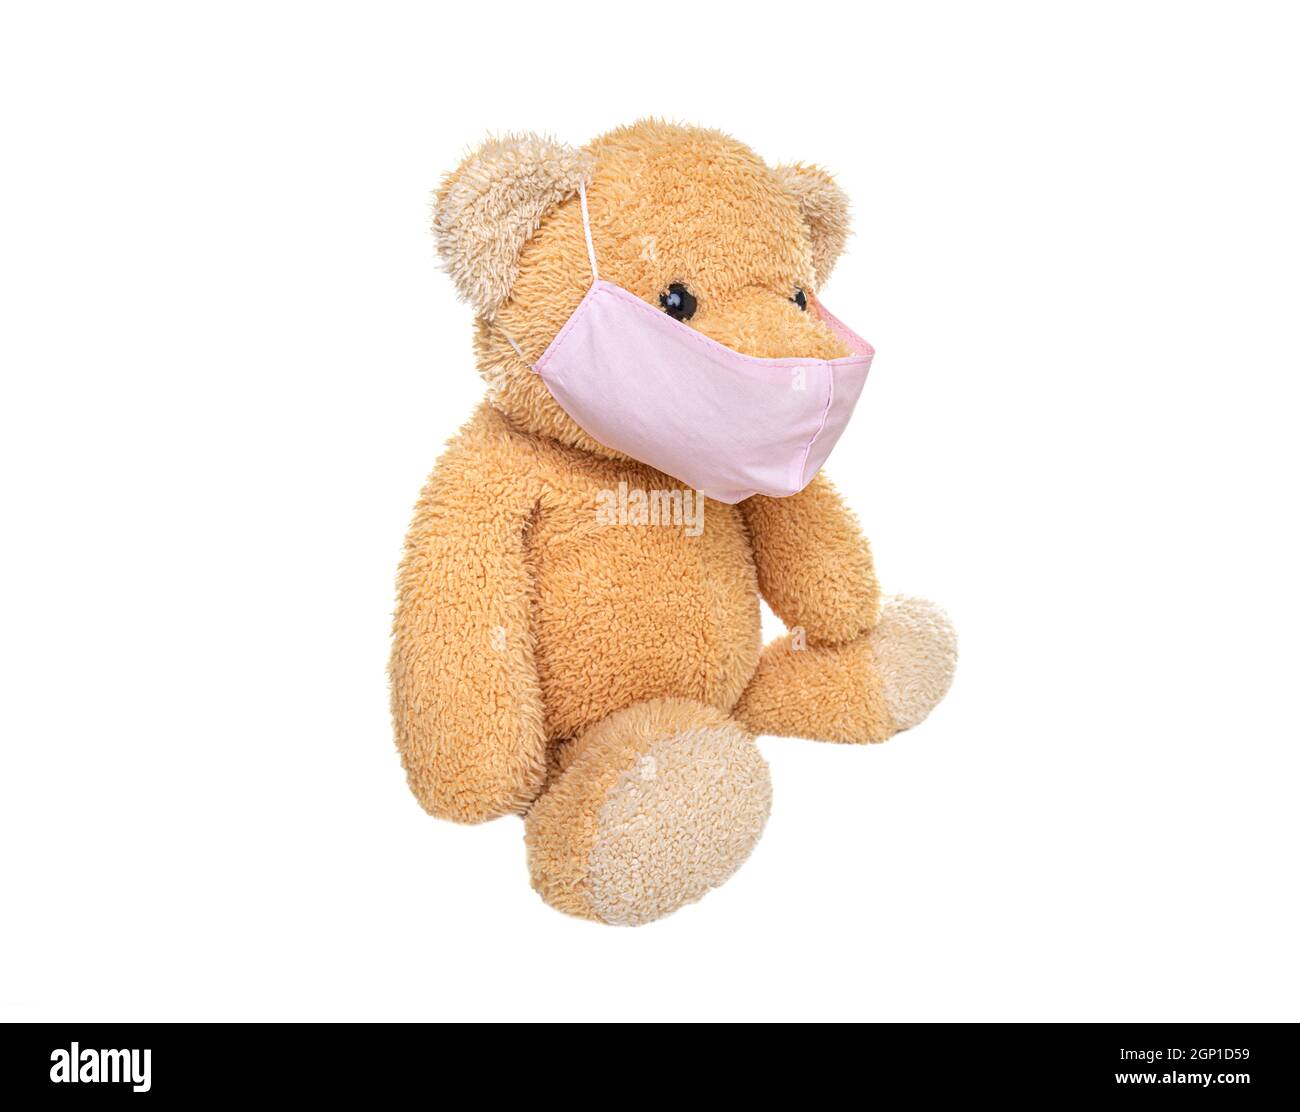 Teddy bear in a medical mask. Stock Photo